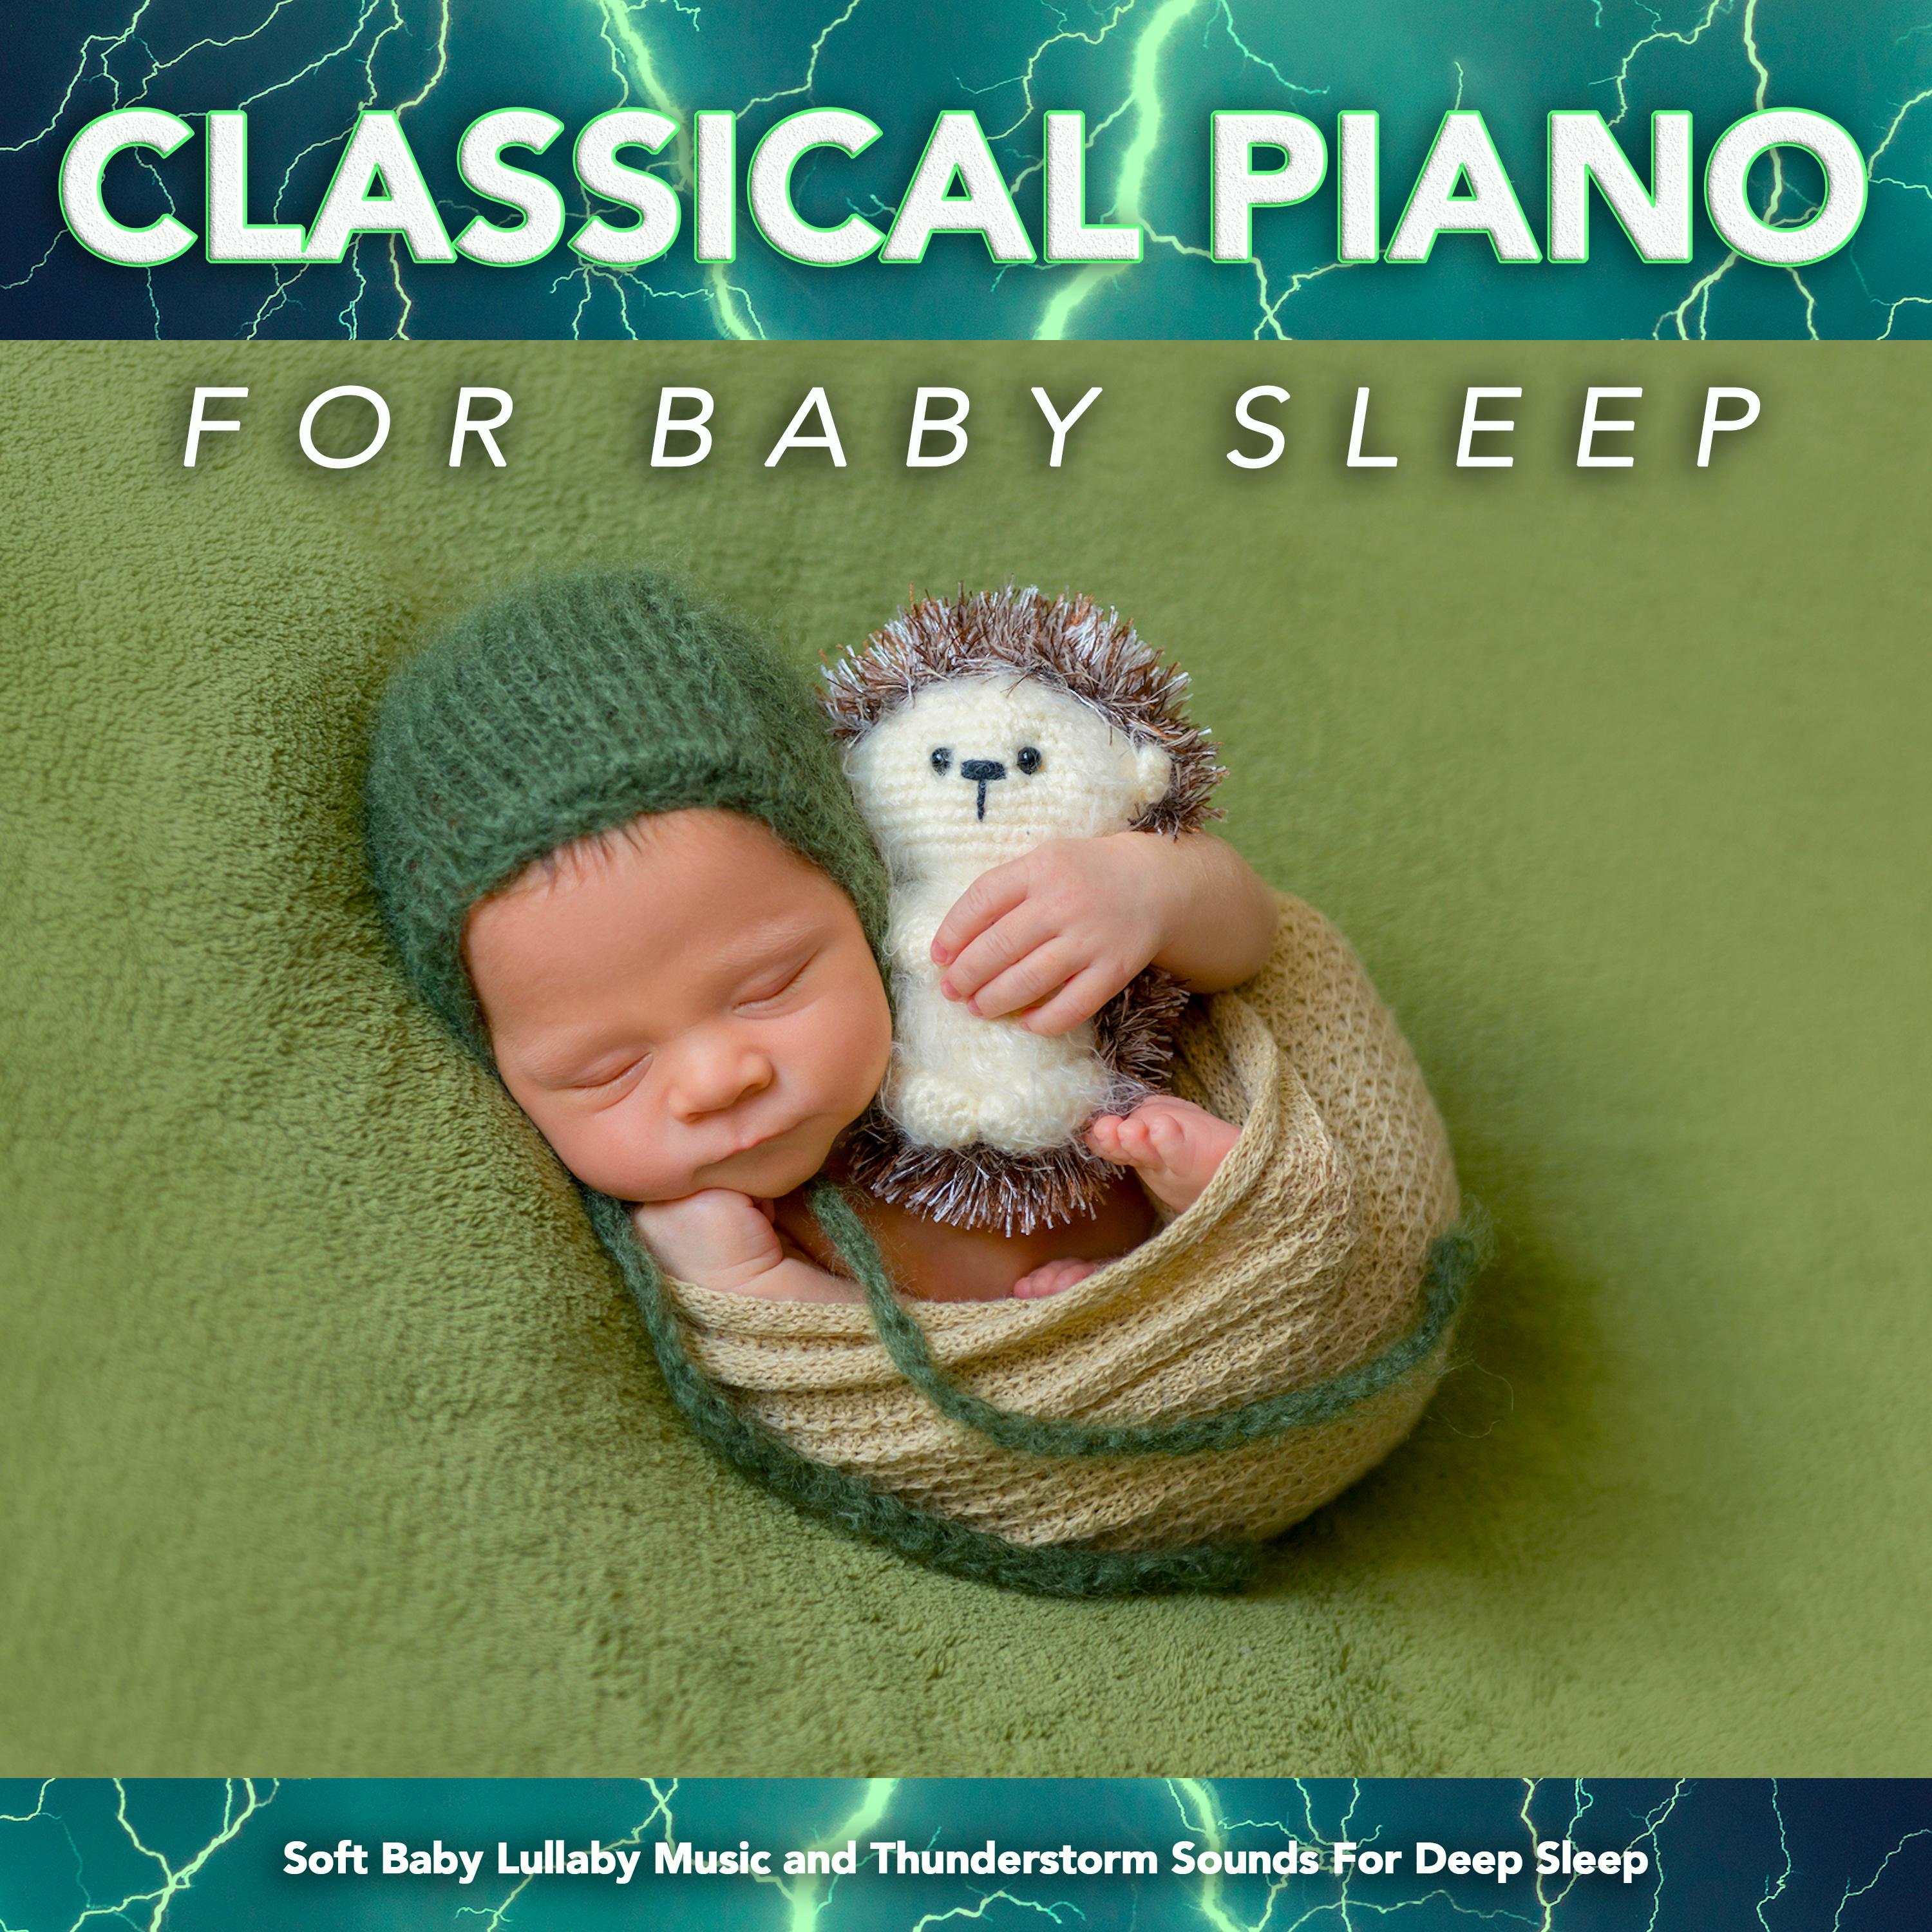 Klaviersonate KV-545 - Soft Baby Lullaby Music - Thunderstorm Sounds - Classical Piano for Baby Sleep